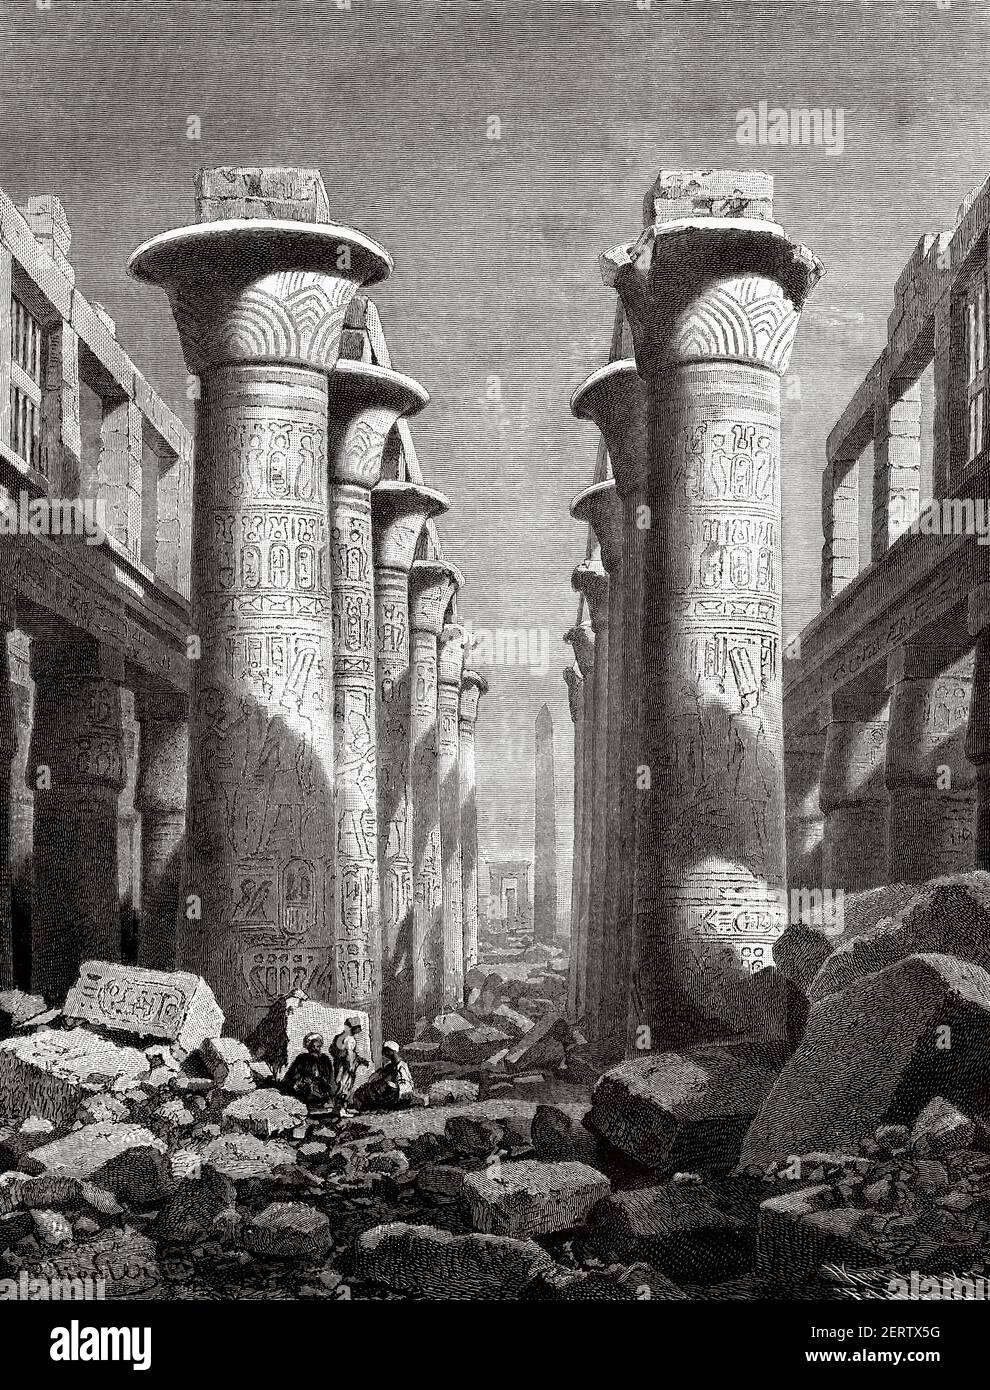 The Great hypostyle hall in the Karnak temple complex in Amon-Re, Ancient Thebes, Egypt in XIX century. Africa. Old 19th century engraved illustration, El Mundo Ilustrado 1881 Stock Photo